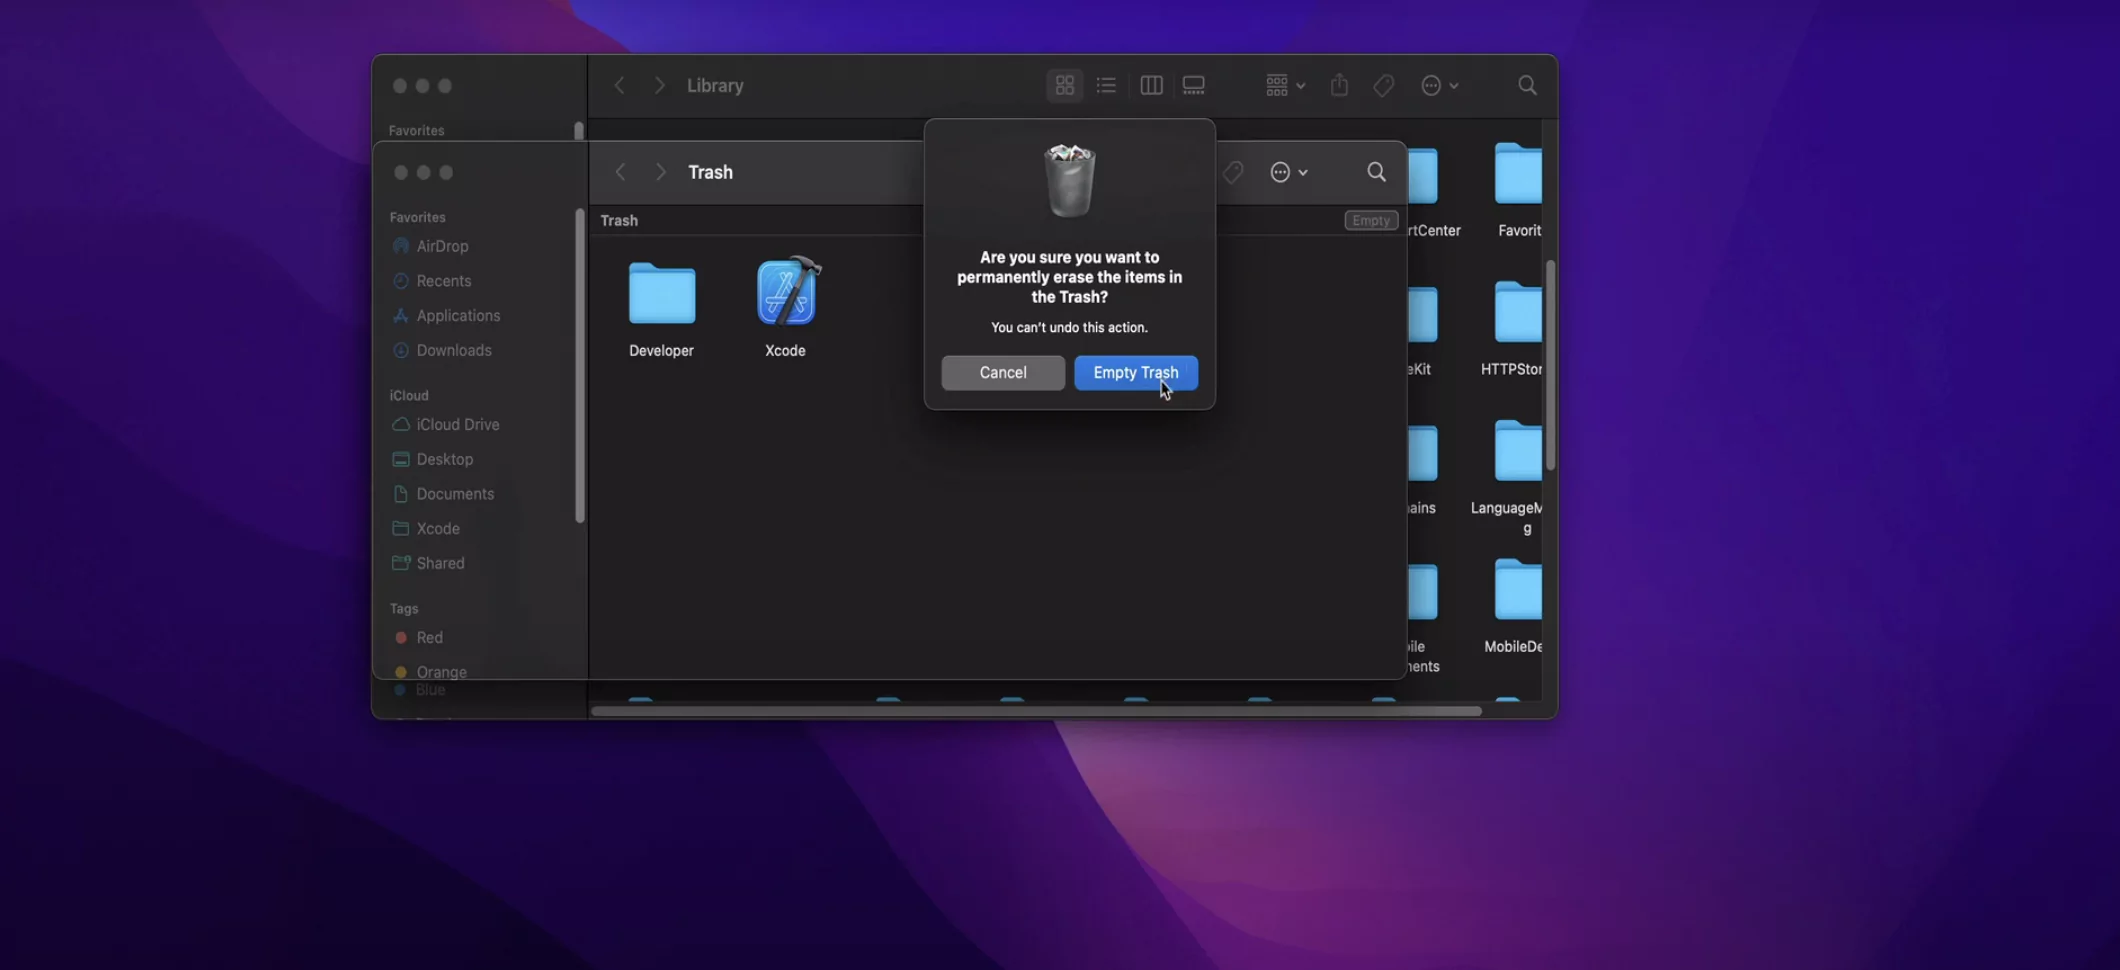 Delete these folders to remove any remaining Xcode